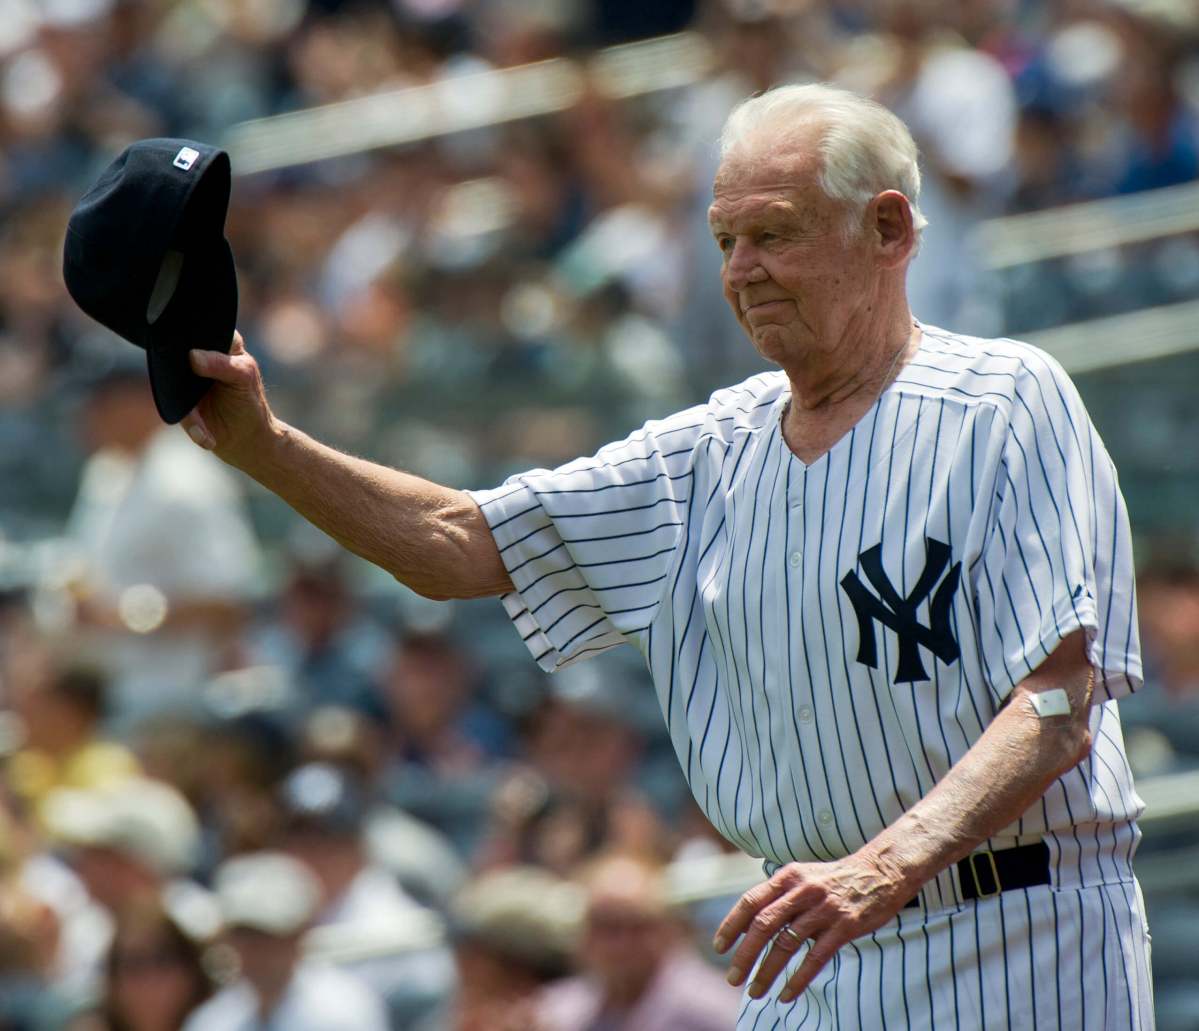 Don Larsen, who pitched perfect World Series game, dies at 90